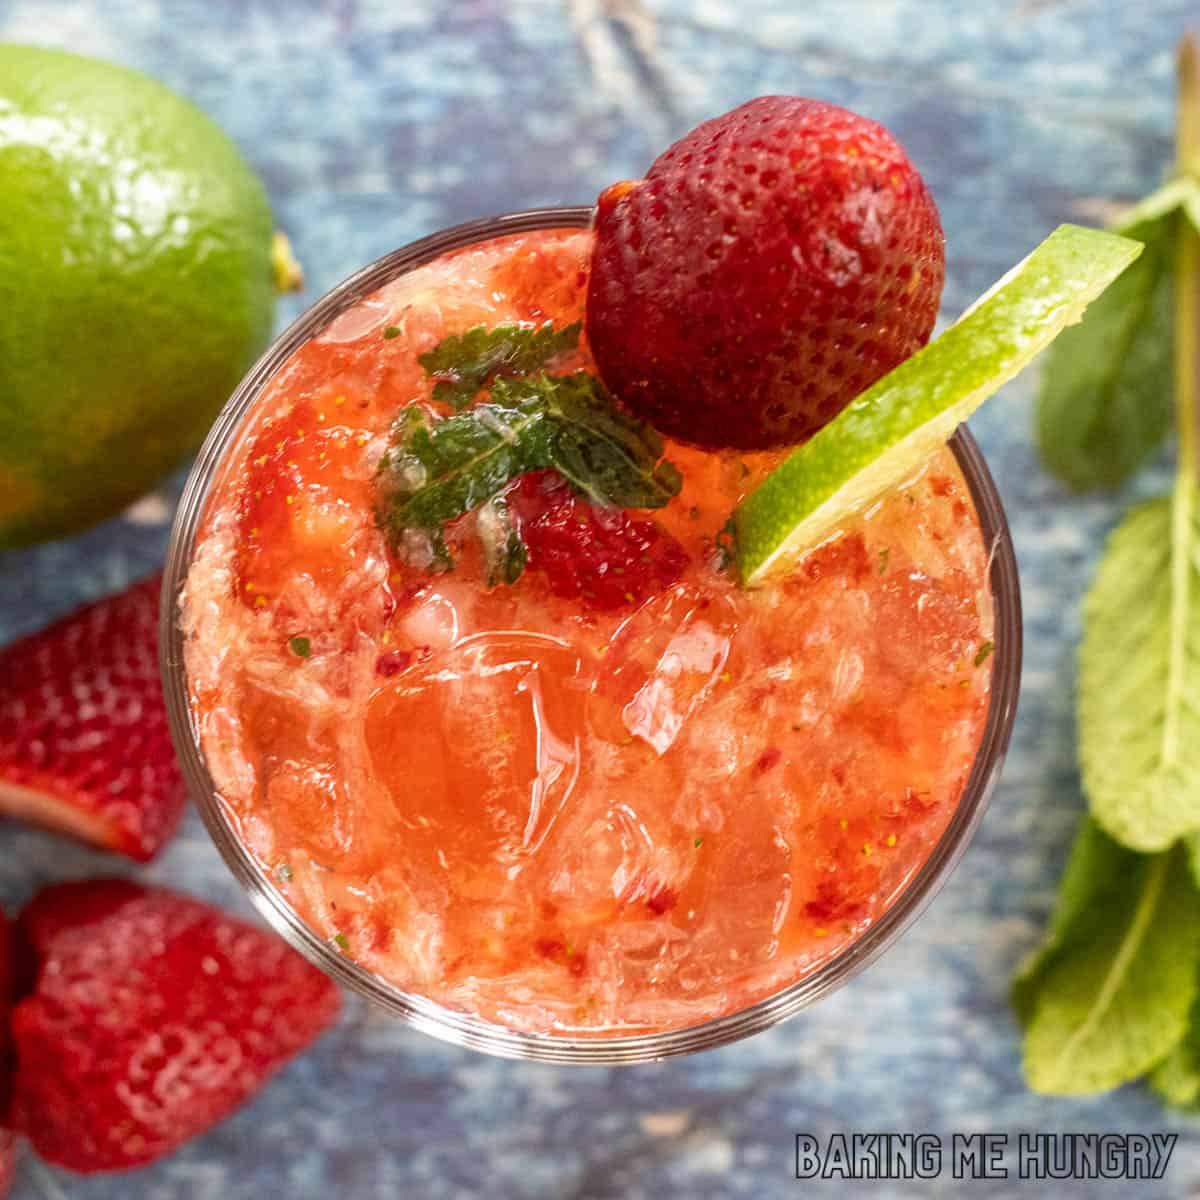 glass of virgin strawberry mojito garnished with a strawberry and lime slice from overhead